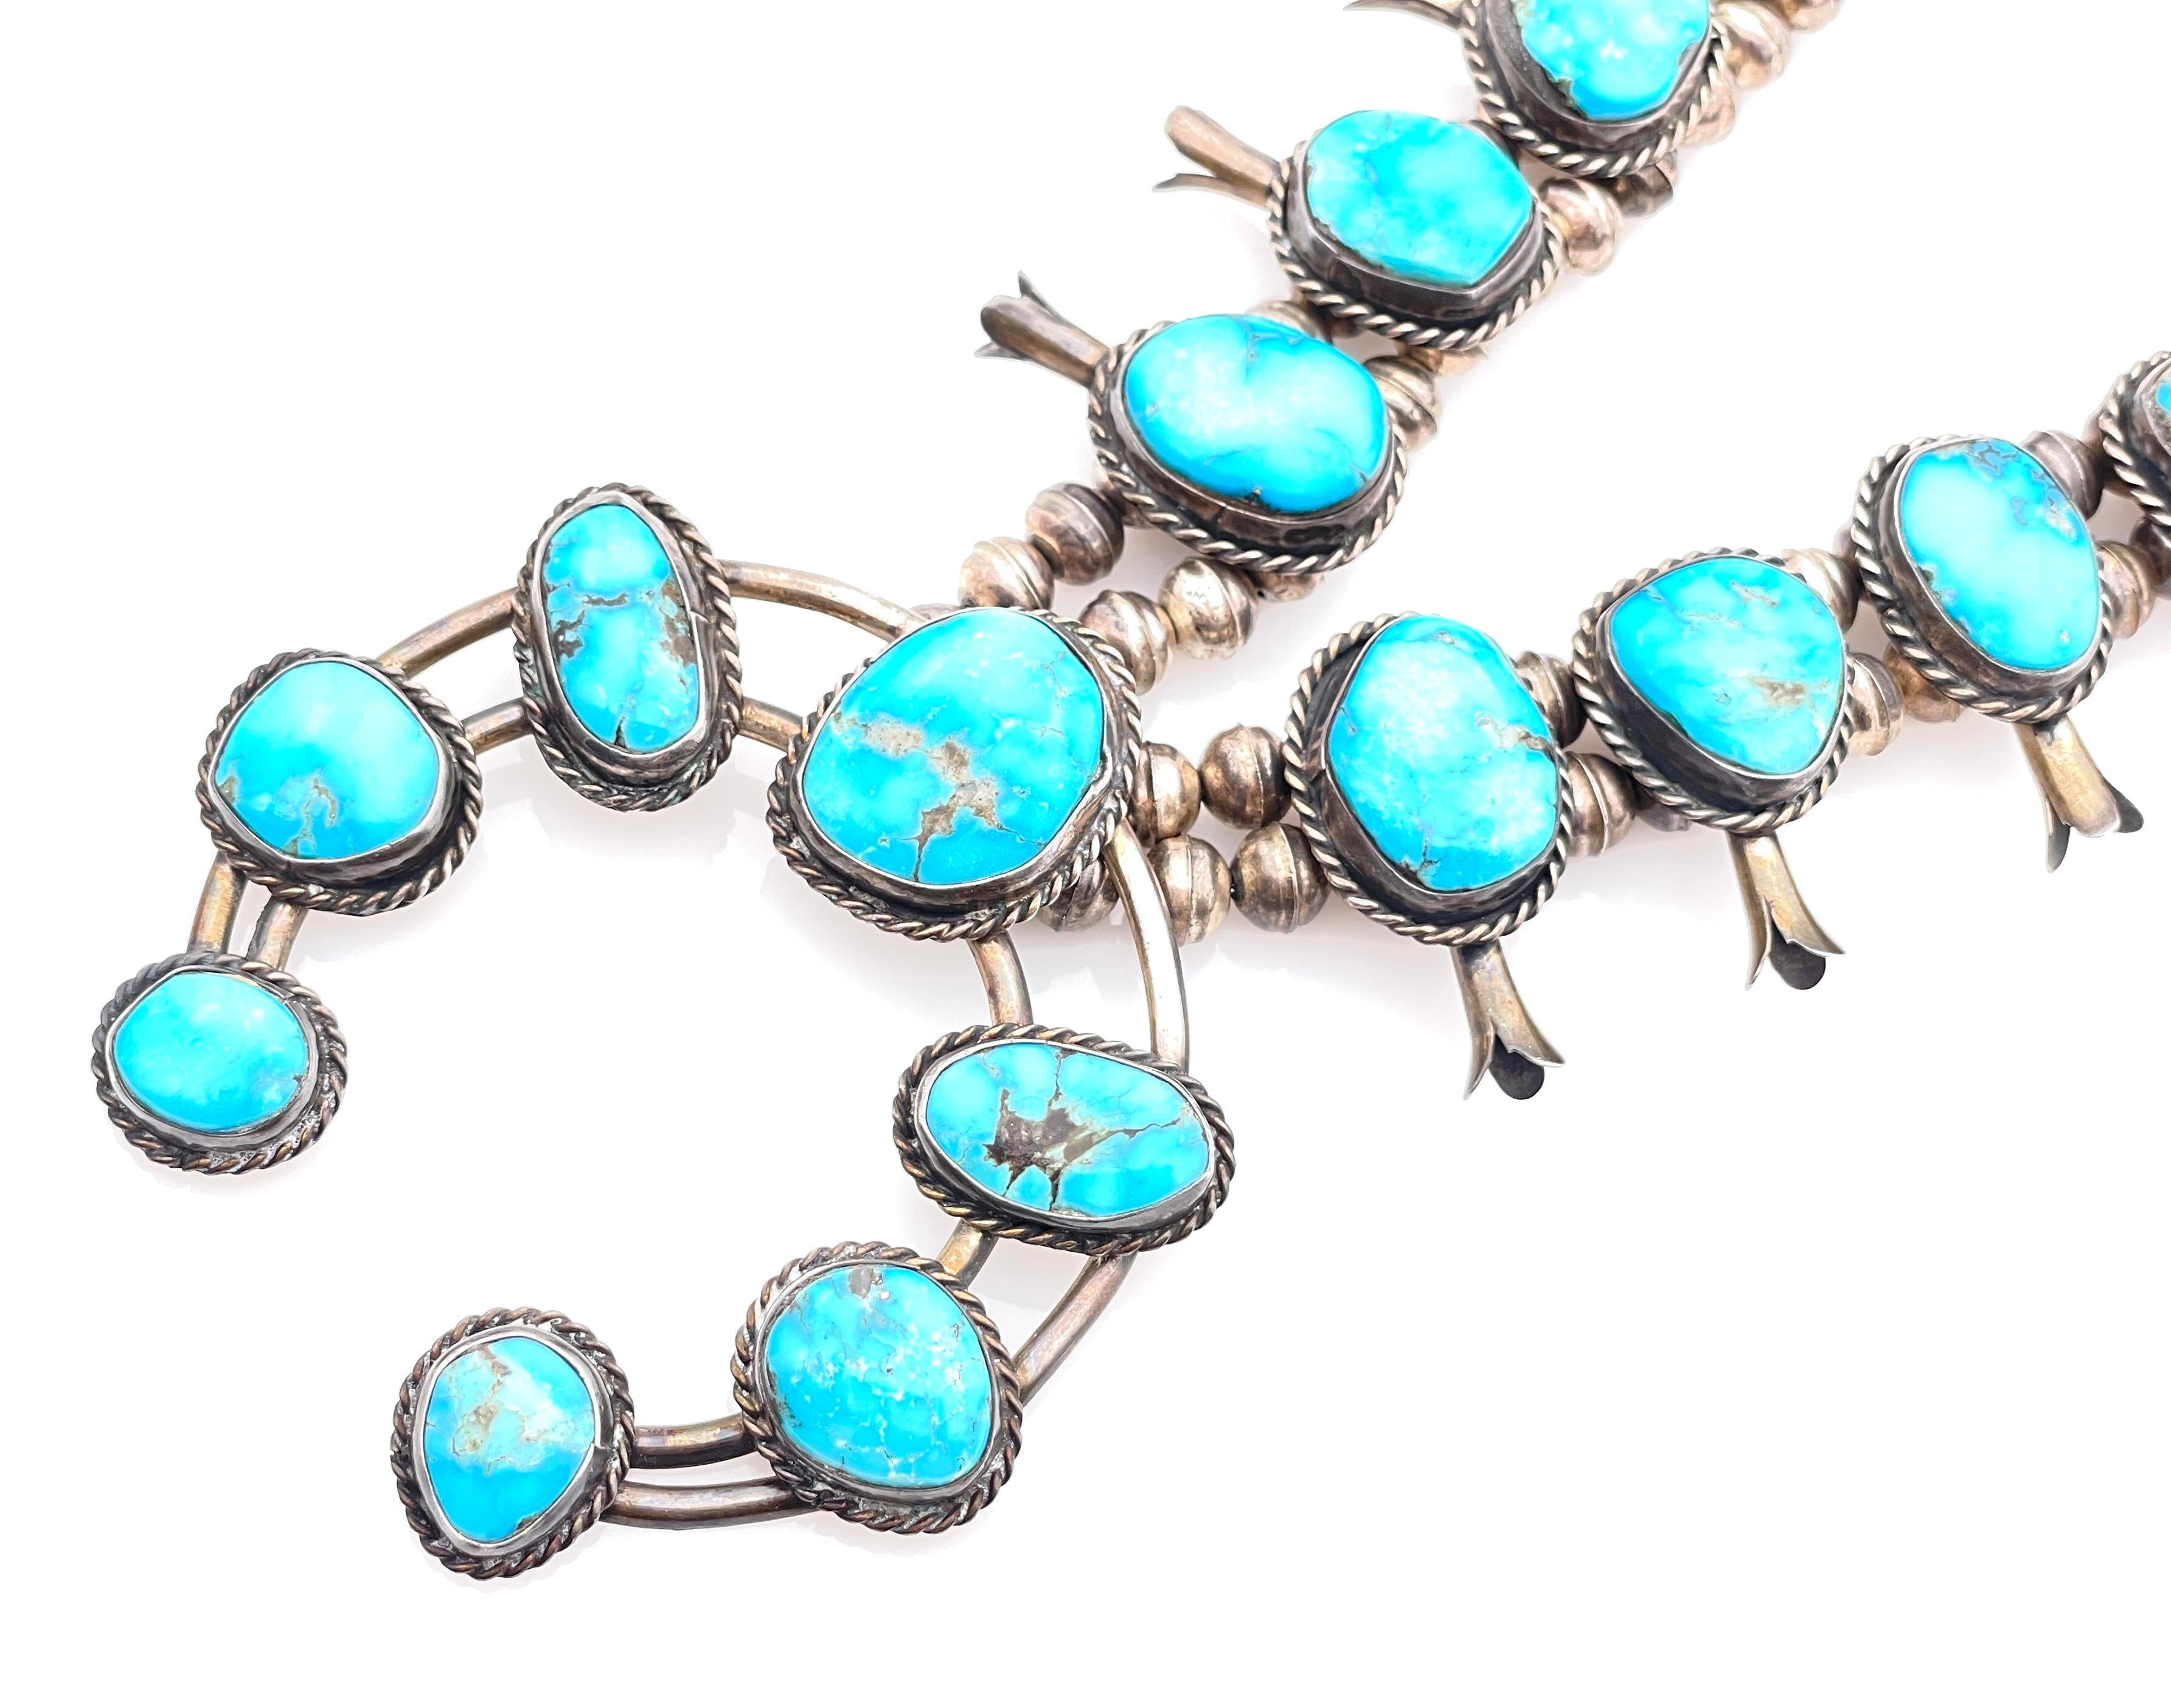 NATIVE AMERICAN STERLING TURQUOISE SQUASH BLOSSOM NECKLACE